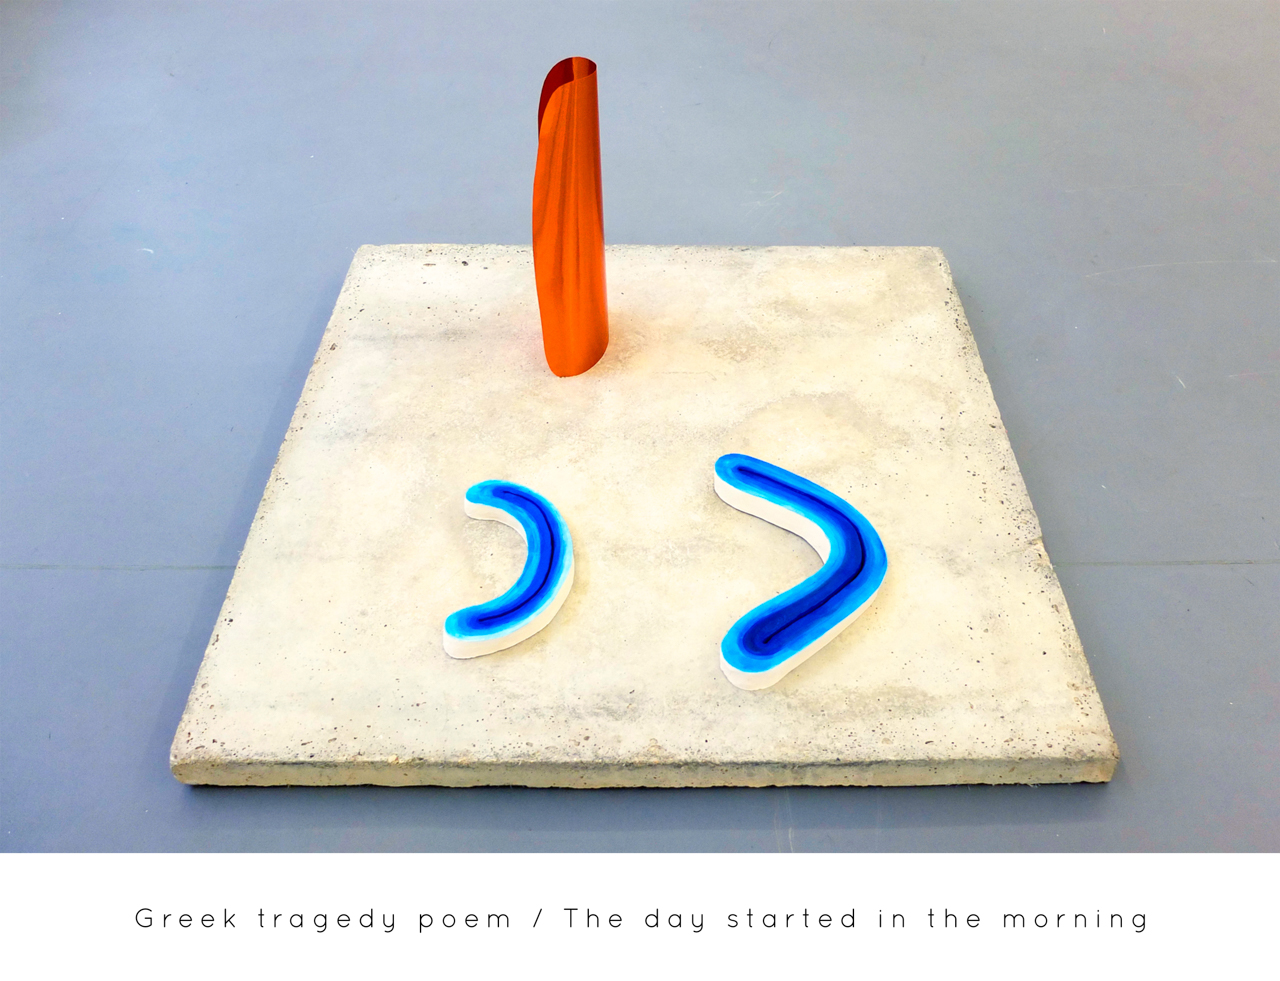 Greek tragedy poem - The day started in the morning